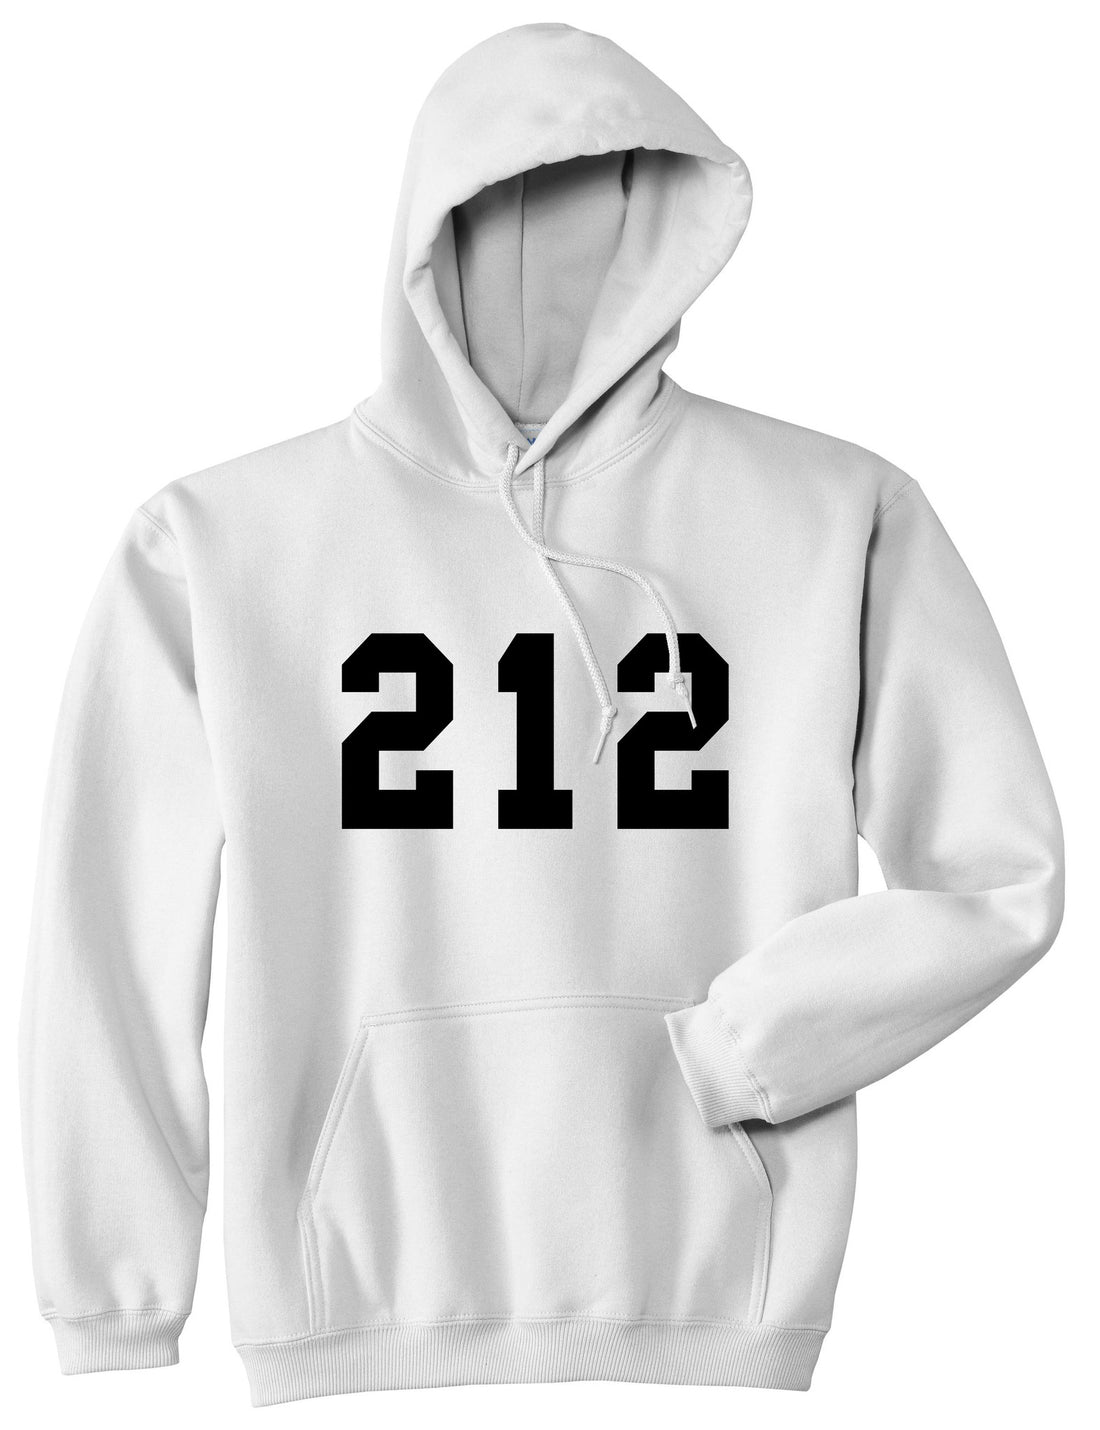 212 New York Area Code Pullover Hoodie in White By Kings Of NY